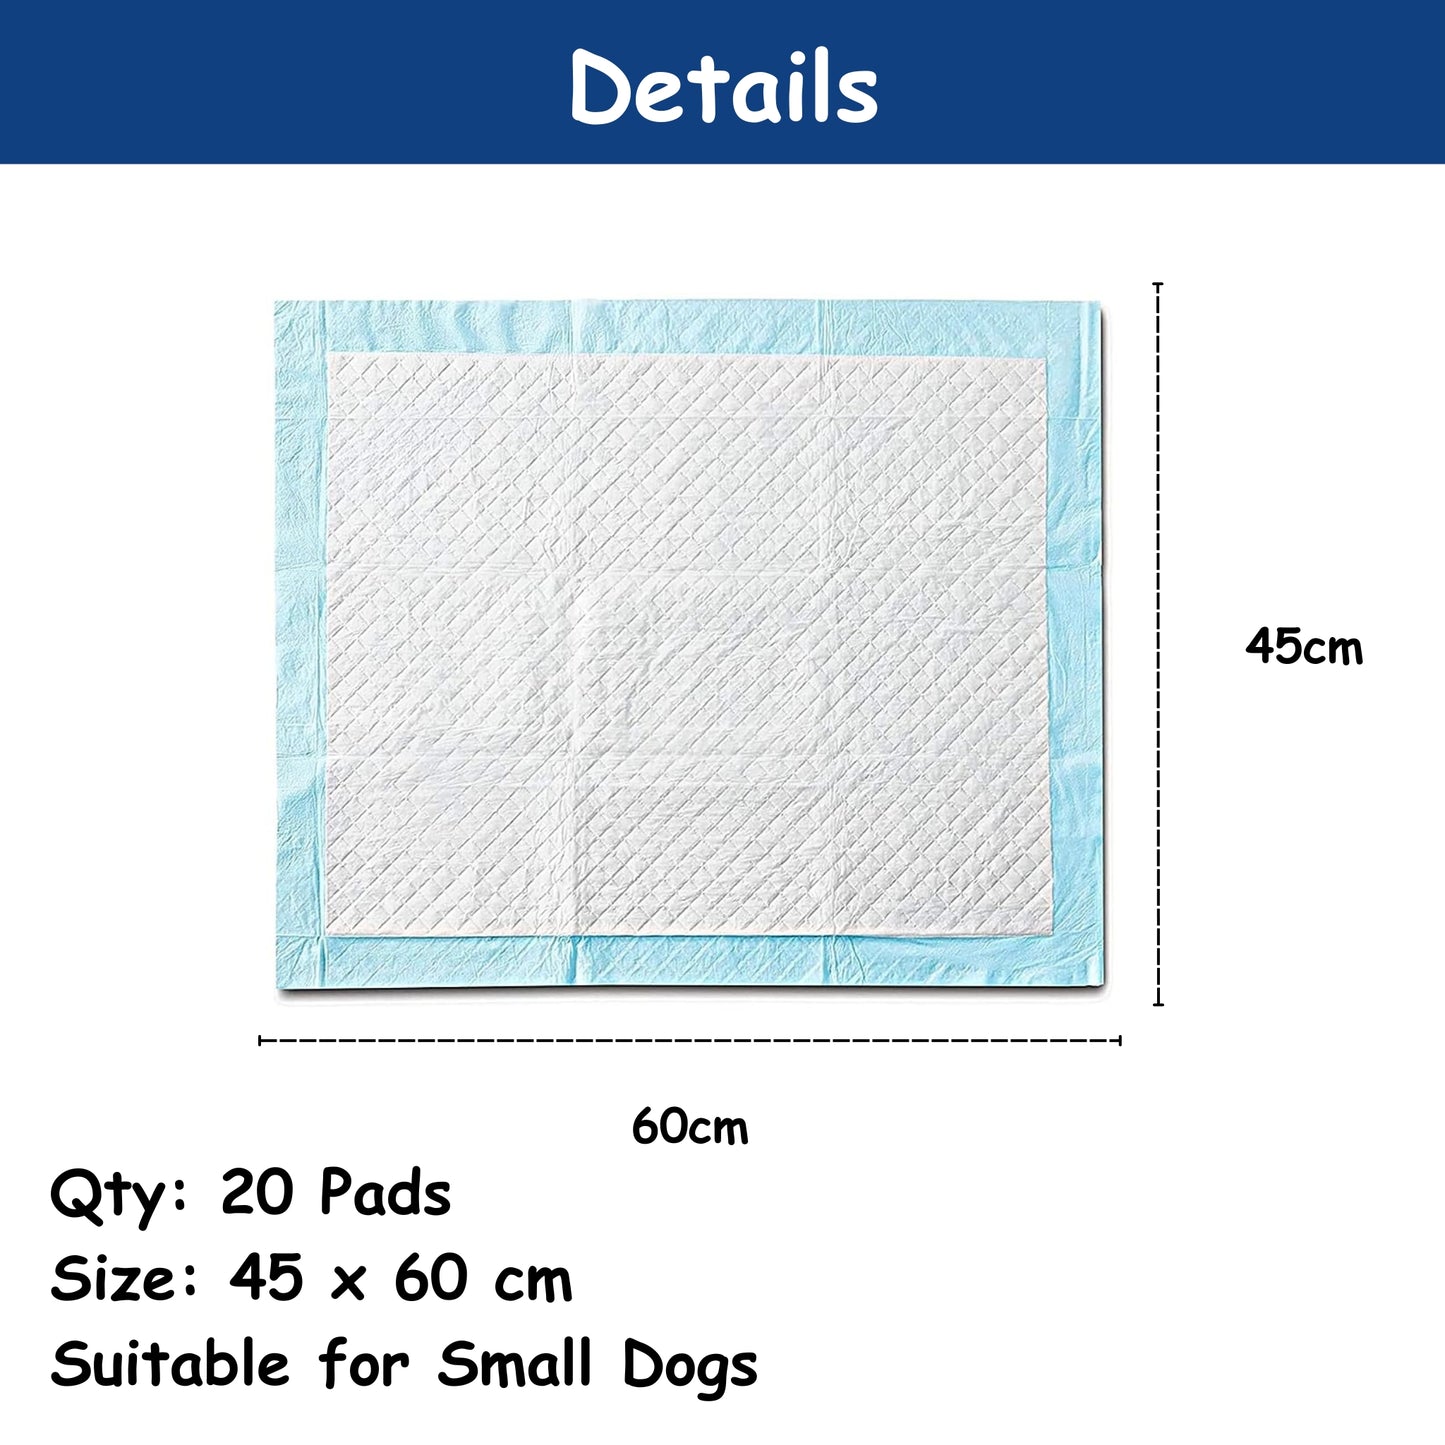 Foodie Puppies Pee/Potty Pet Training Pad - 45x60cm (10 Pads, Pack of 2)